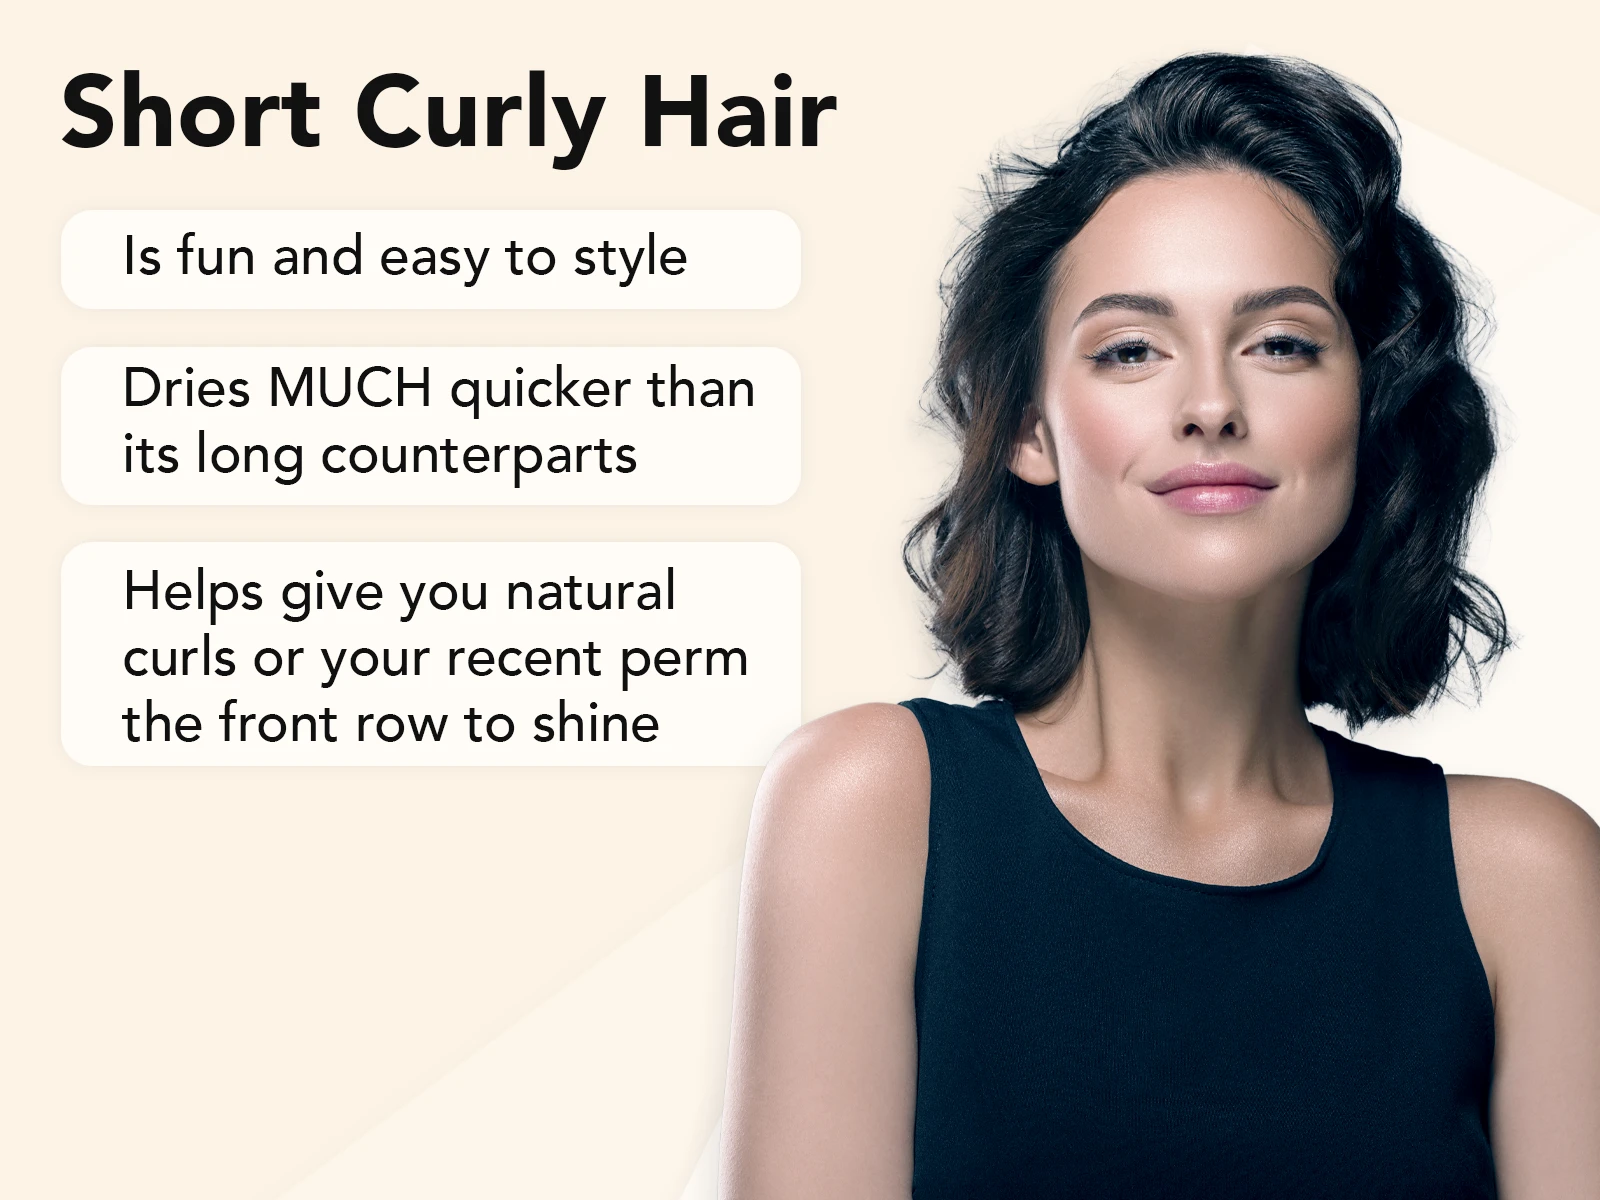 Short Curly Hair | 30 Ways to Rock This Trending Style